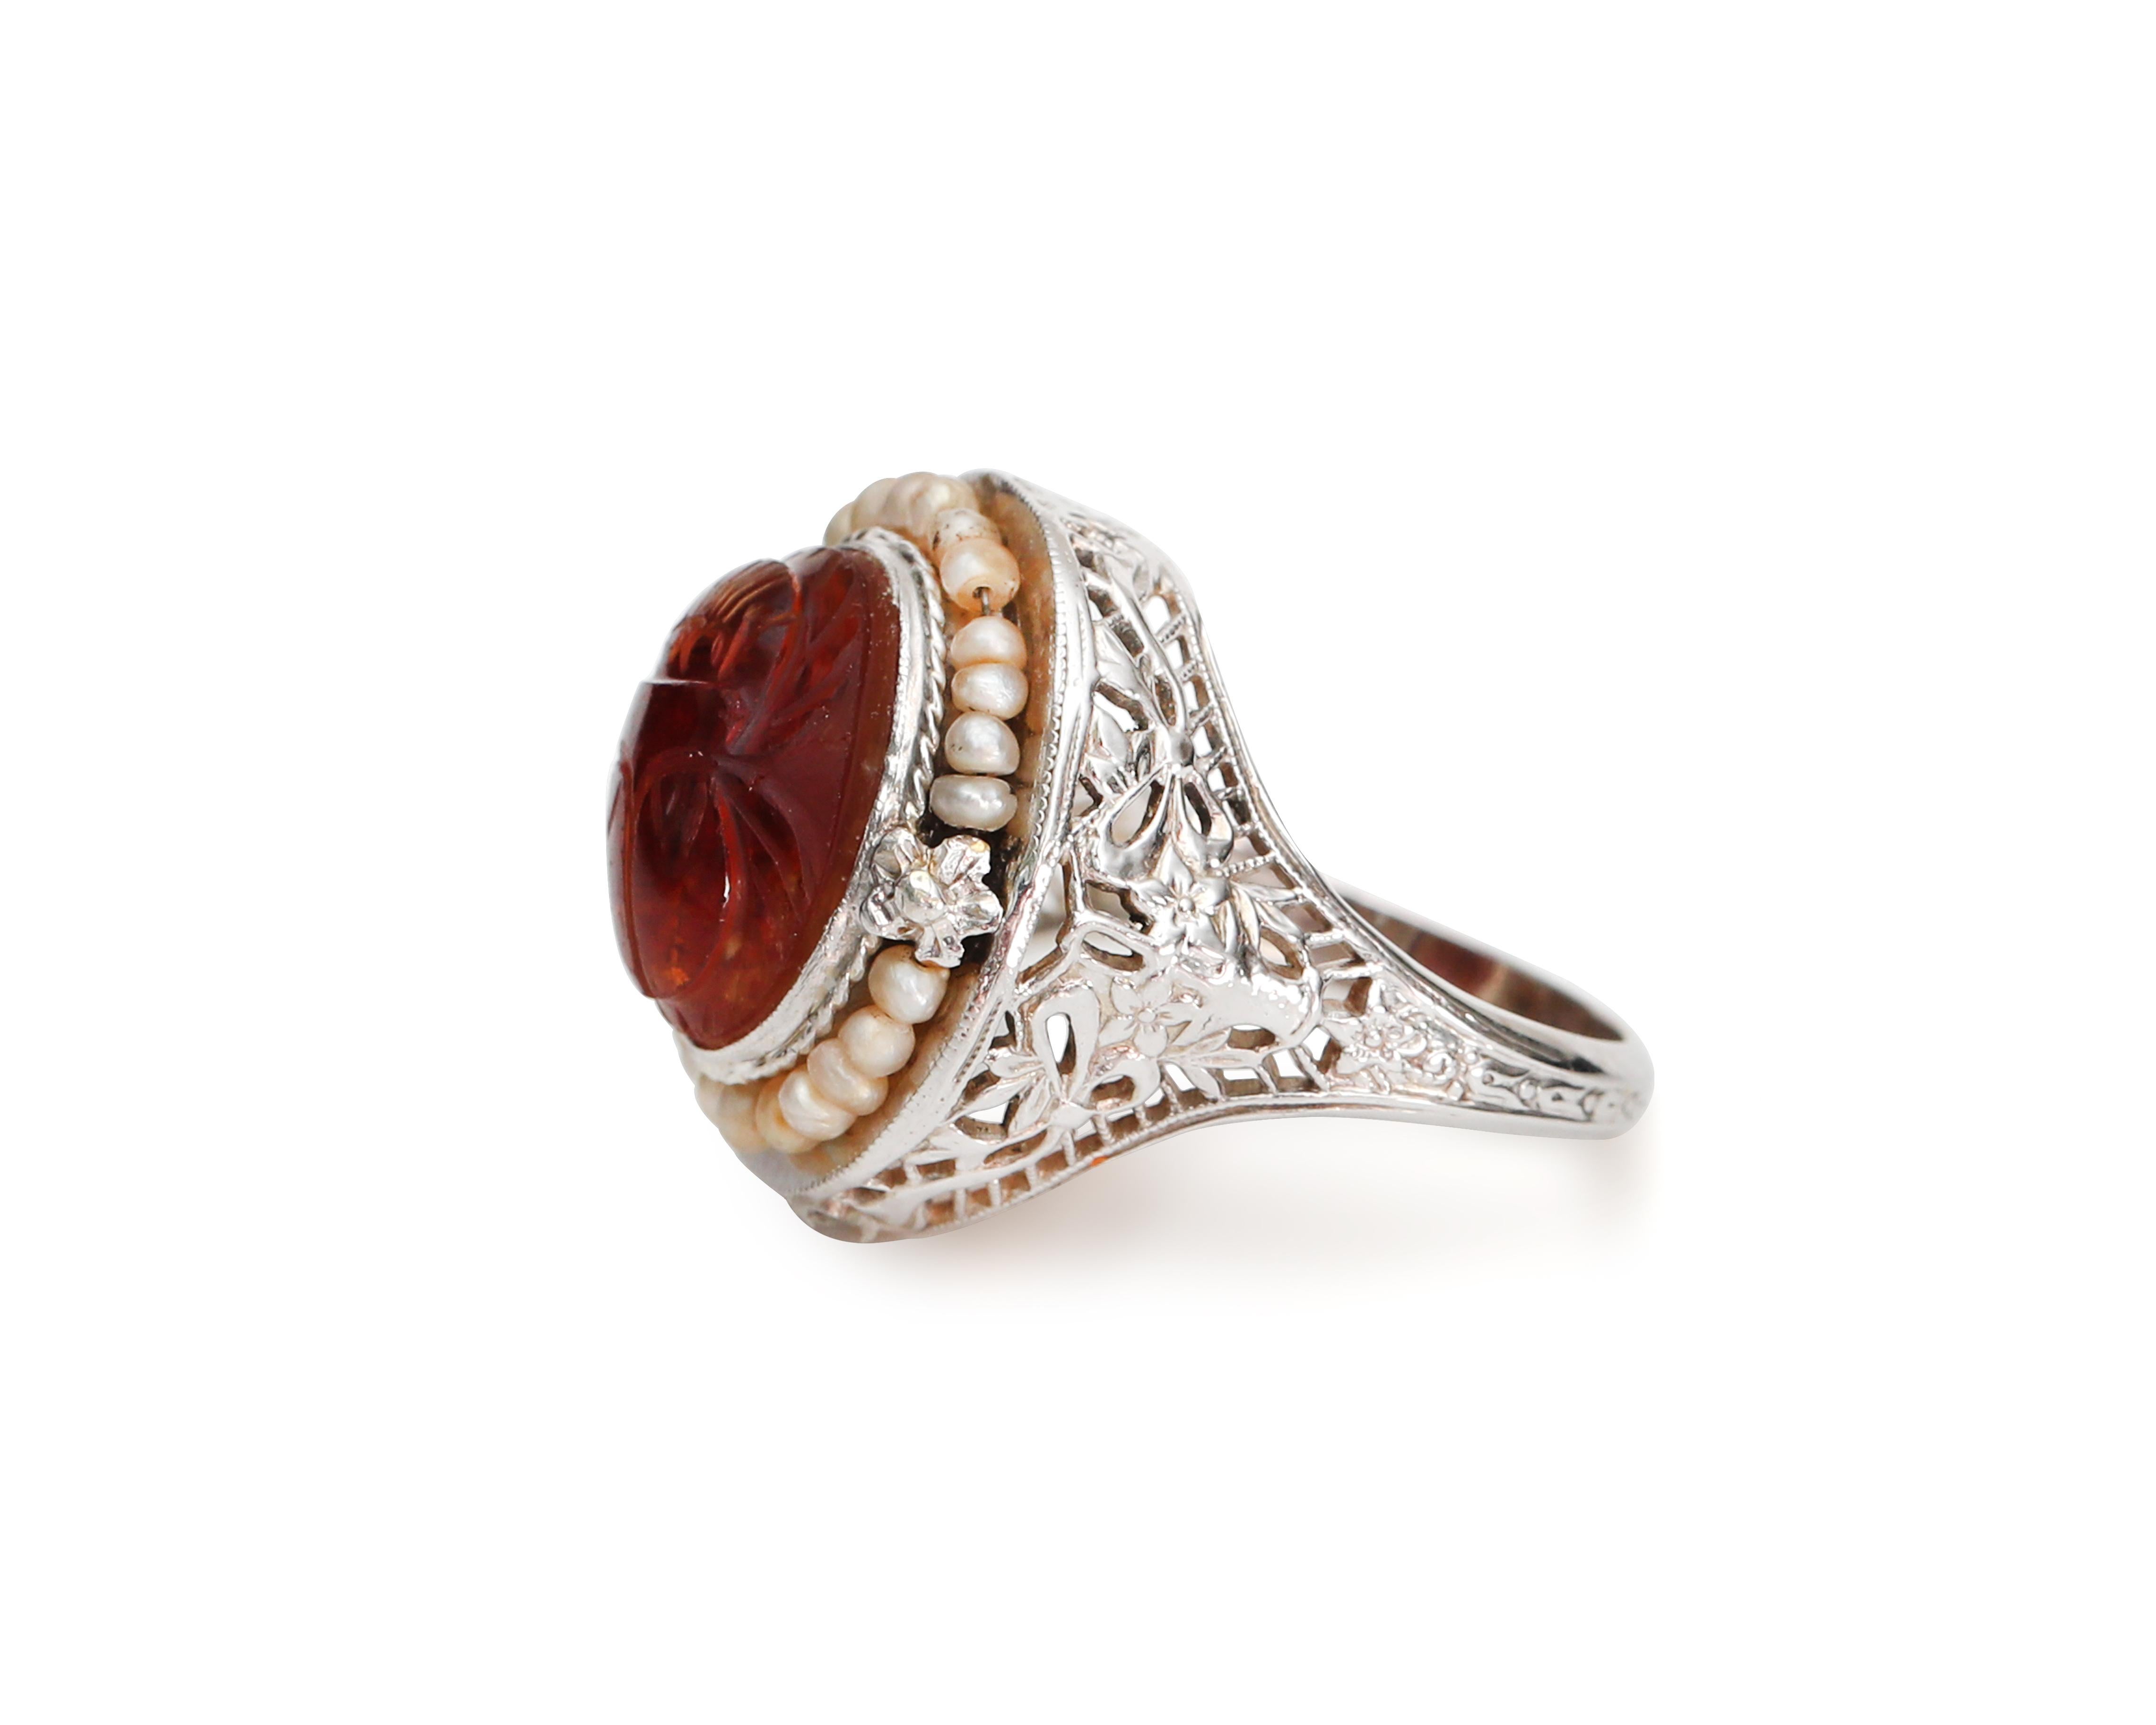 Victorian 14K White Gold Filigree Ring, Scarab Carved Carnelian Seed Pearl Halo 1